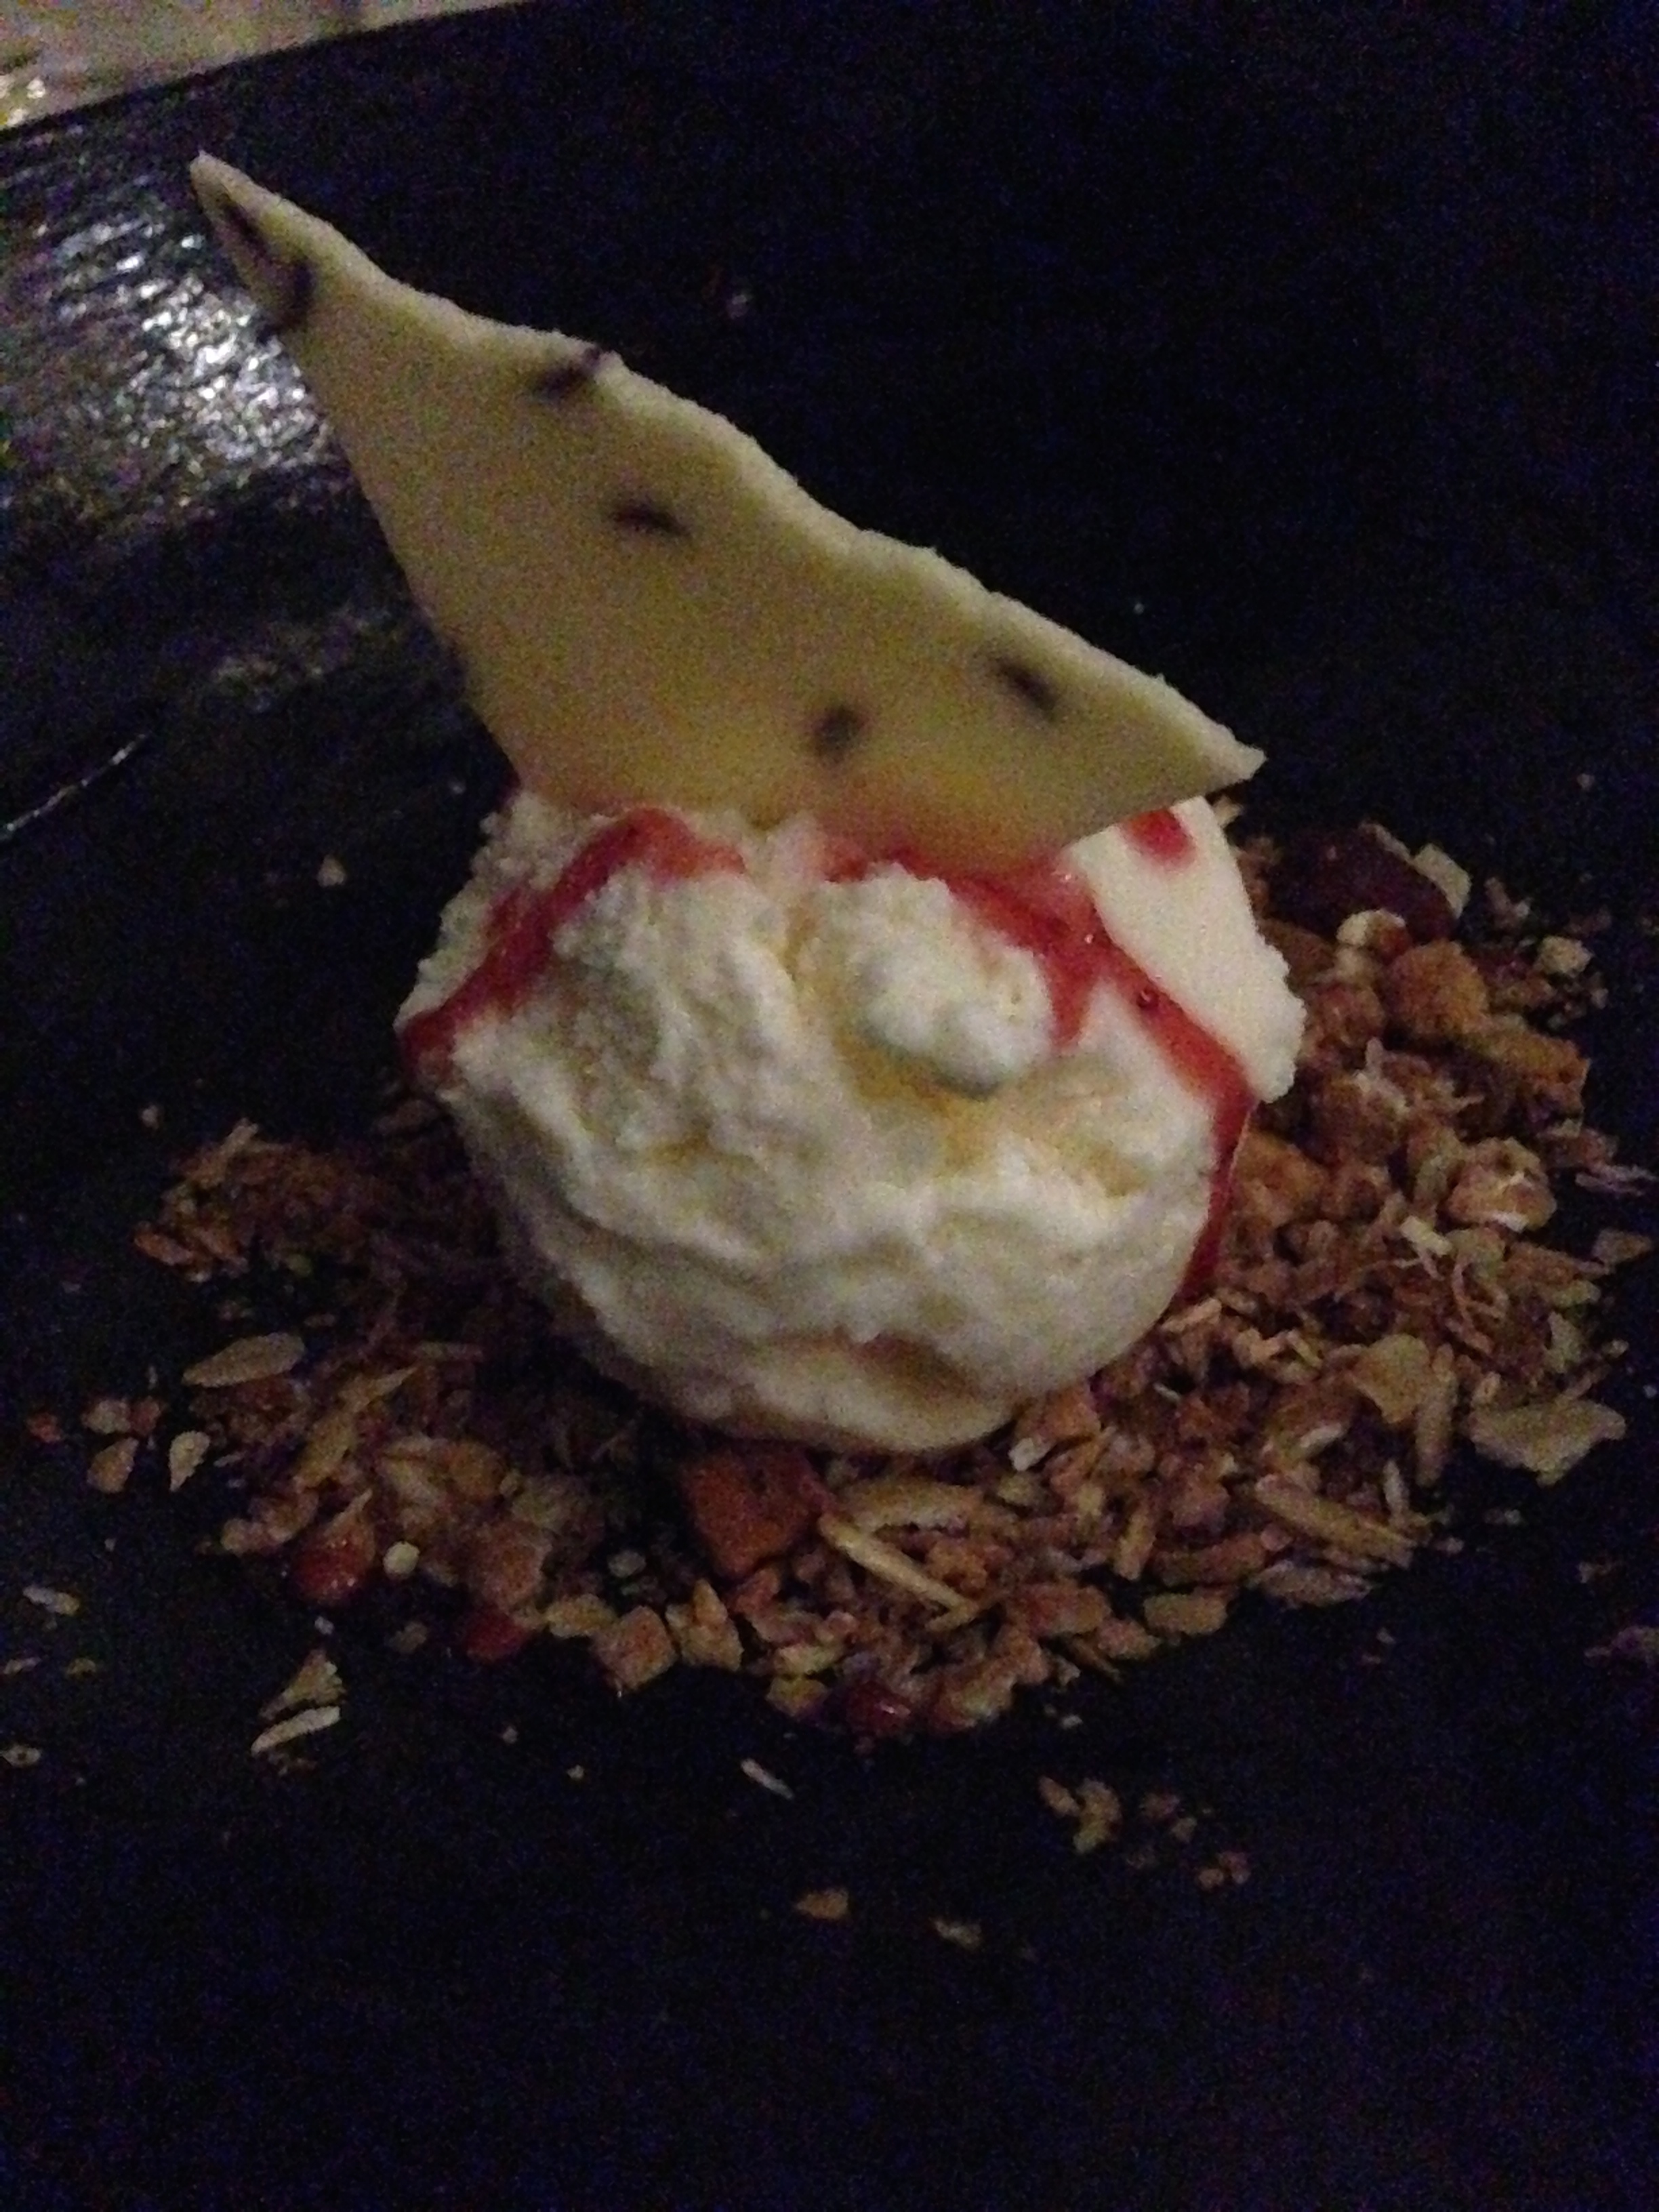  Ninth Course: DESSERT!! First part, homemade Icelandic ice cream with granola and white chocolate accent 